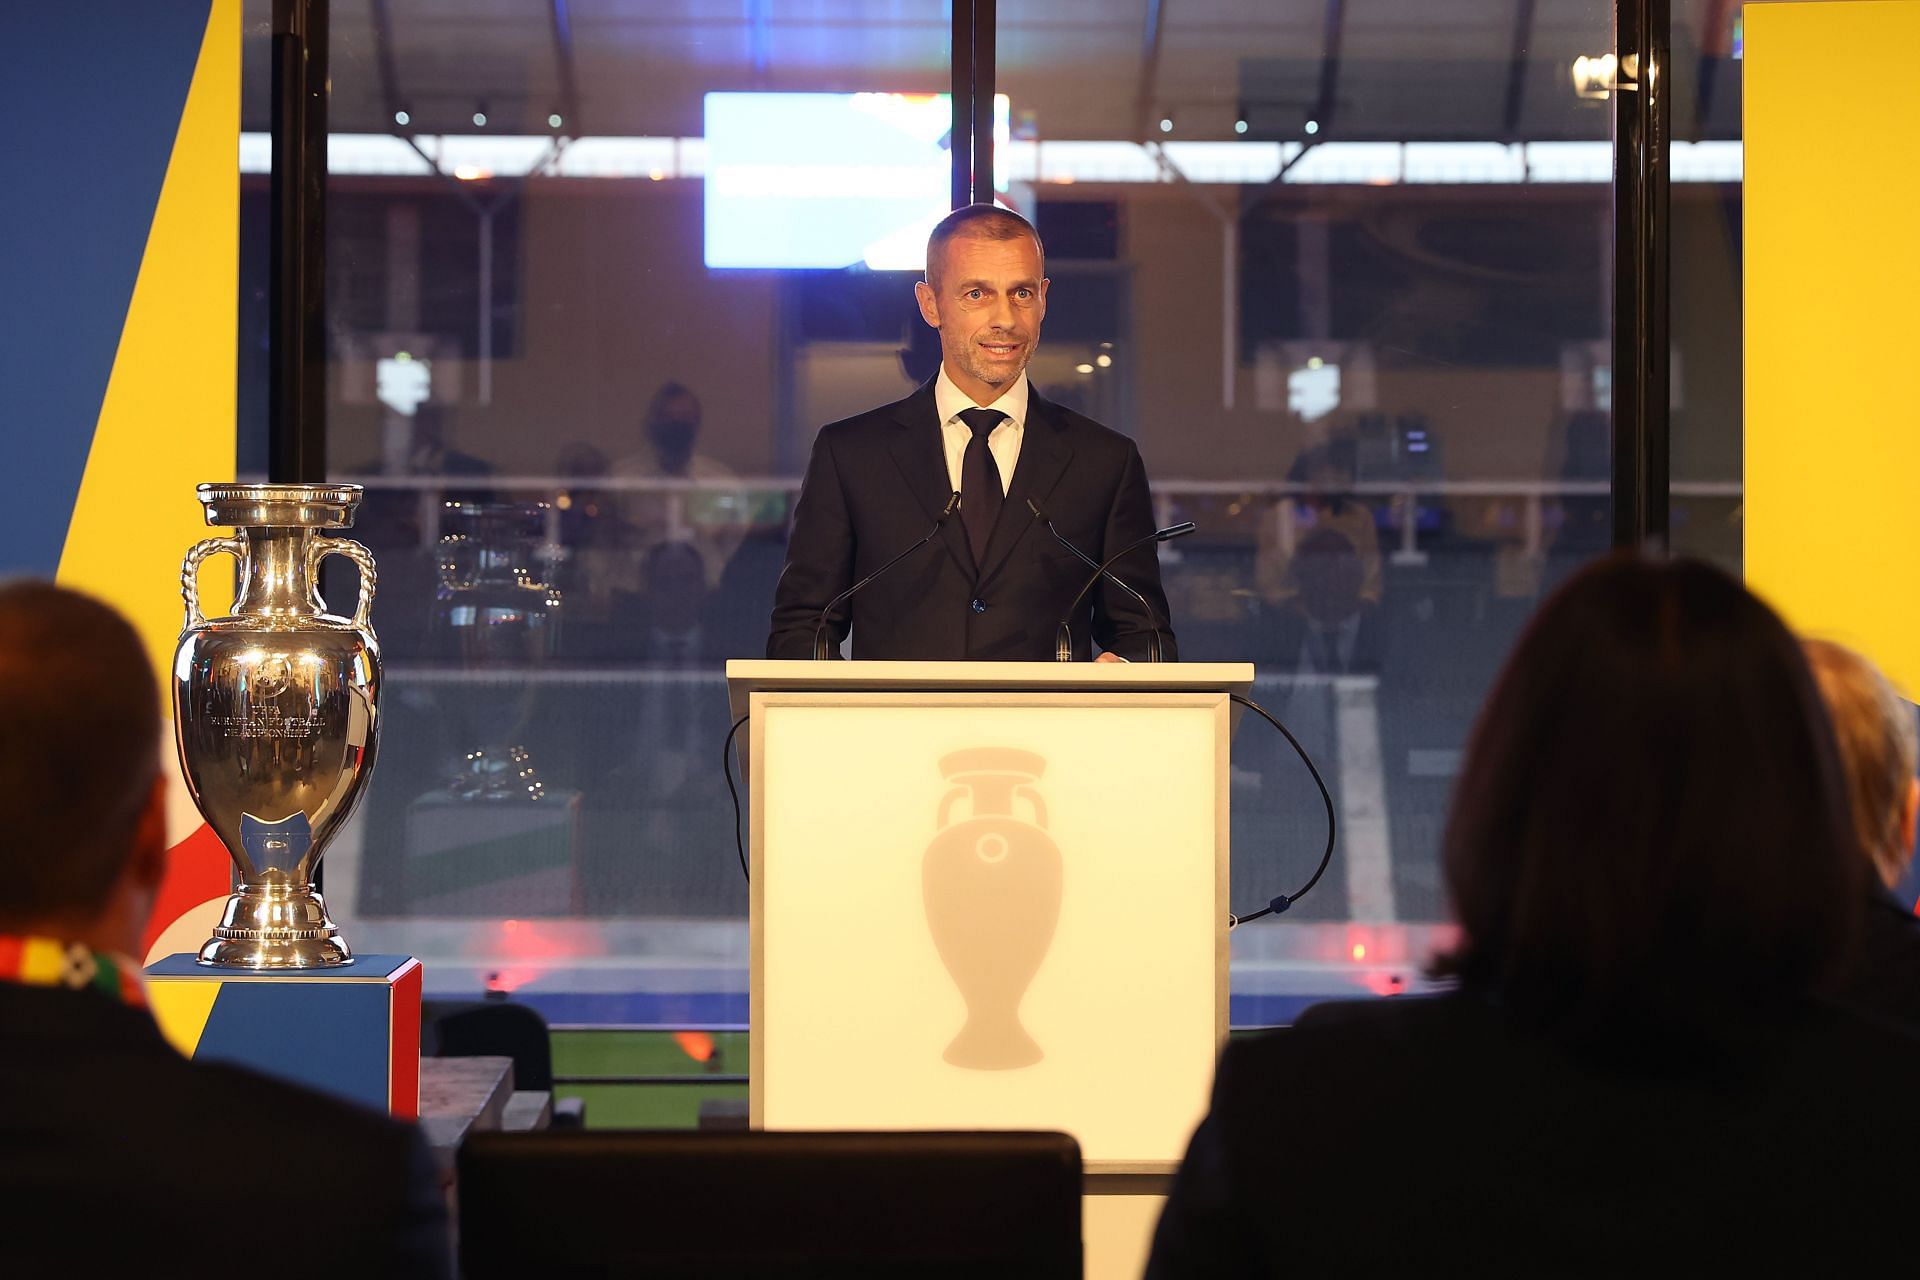 UEFA has been trying to address criticisms related to its earlier proposals